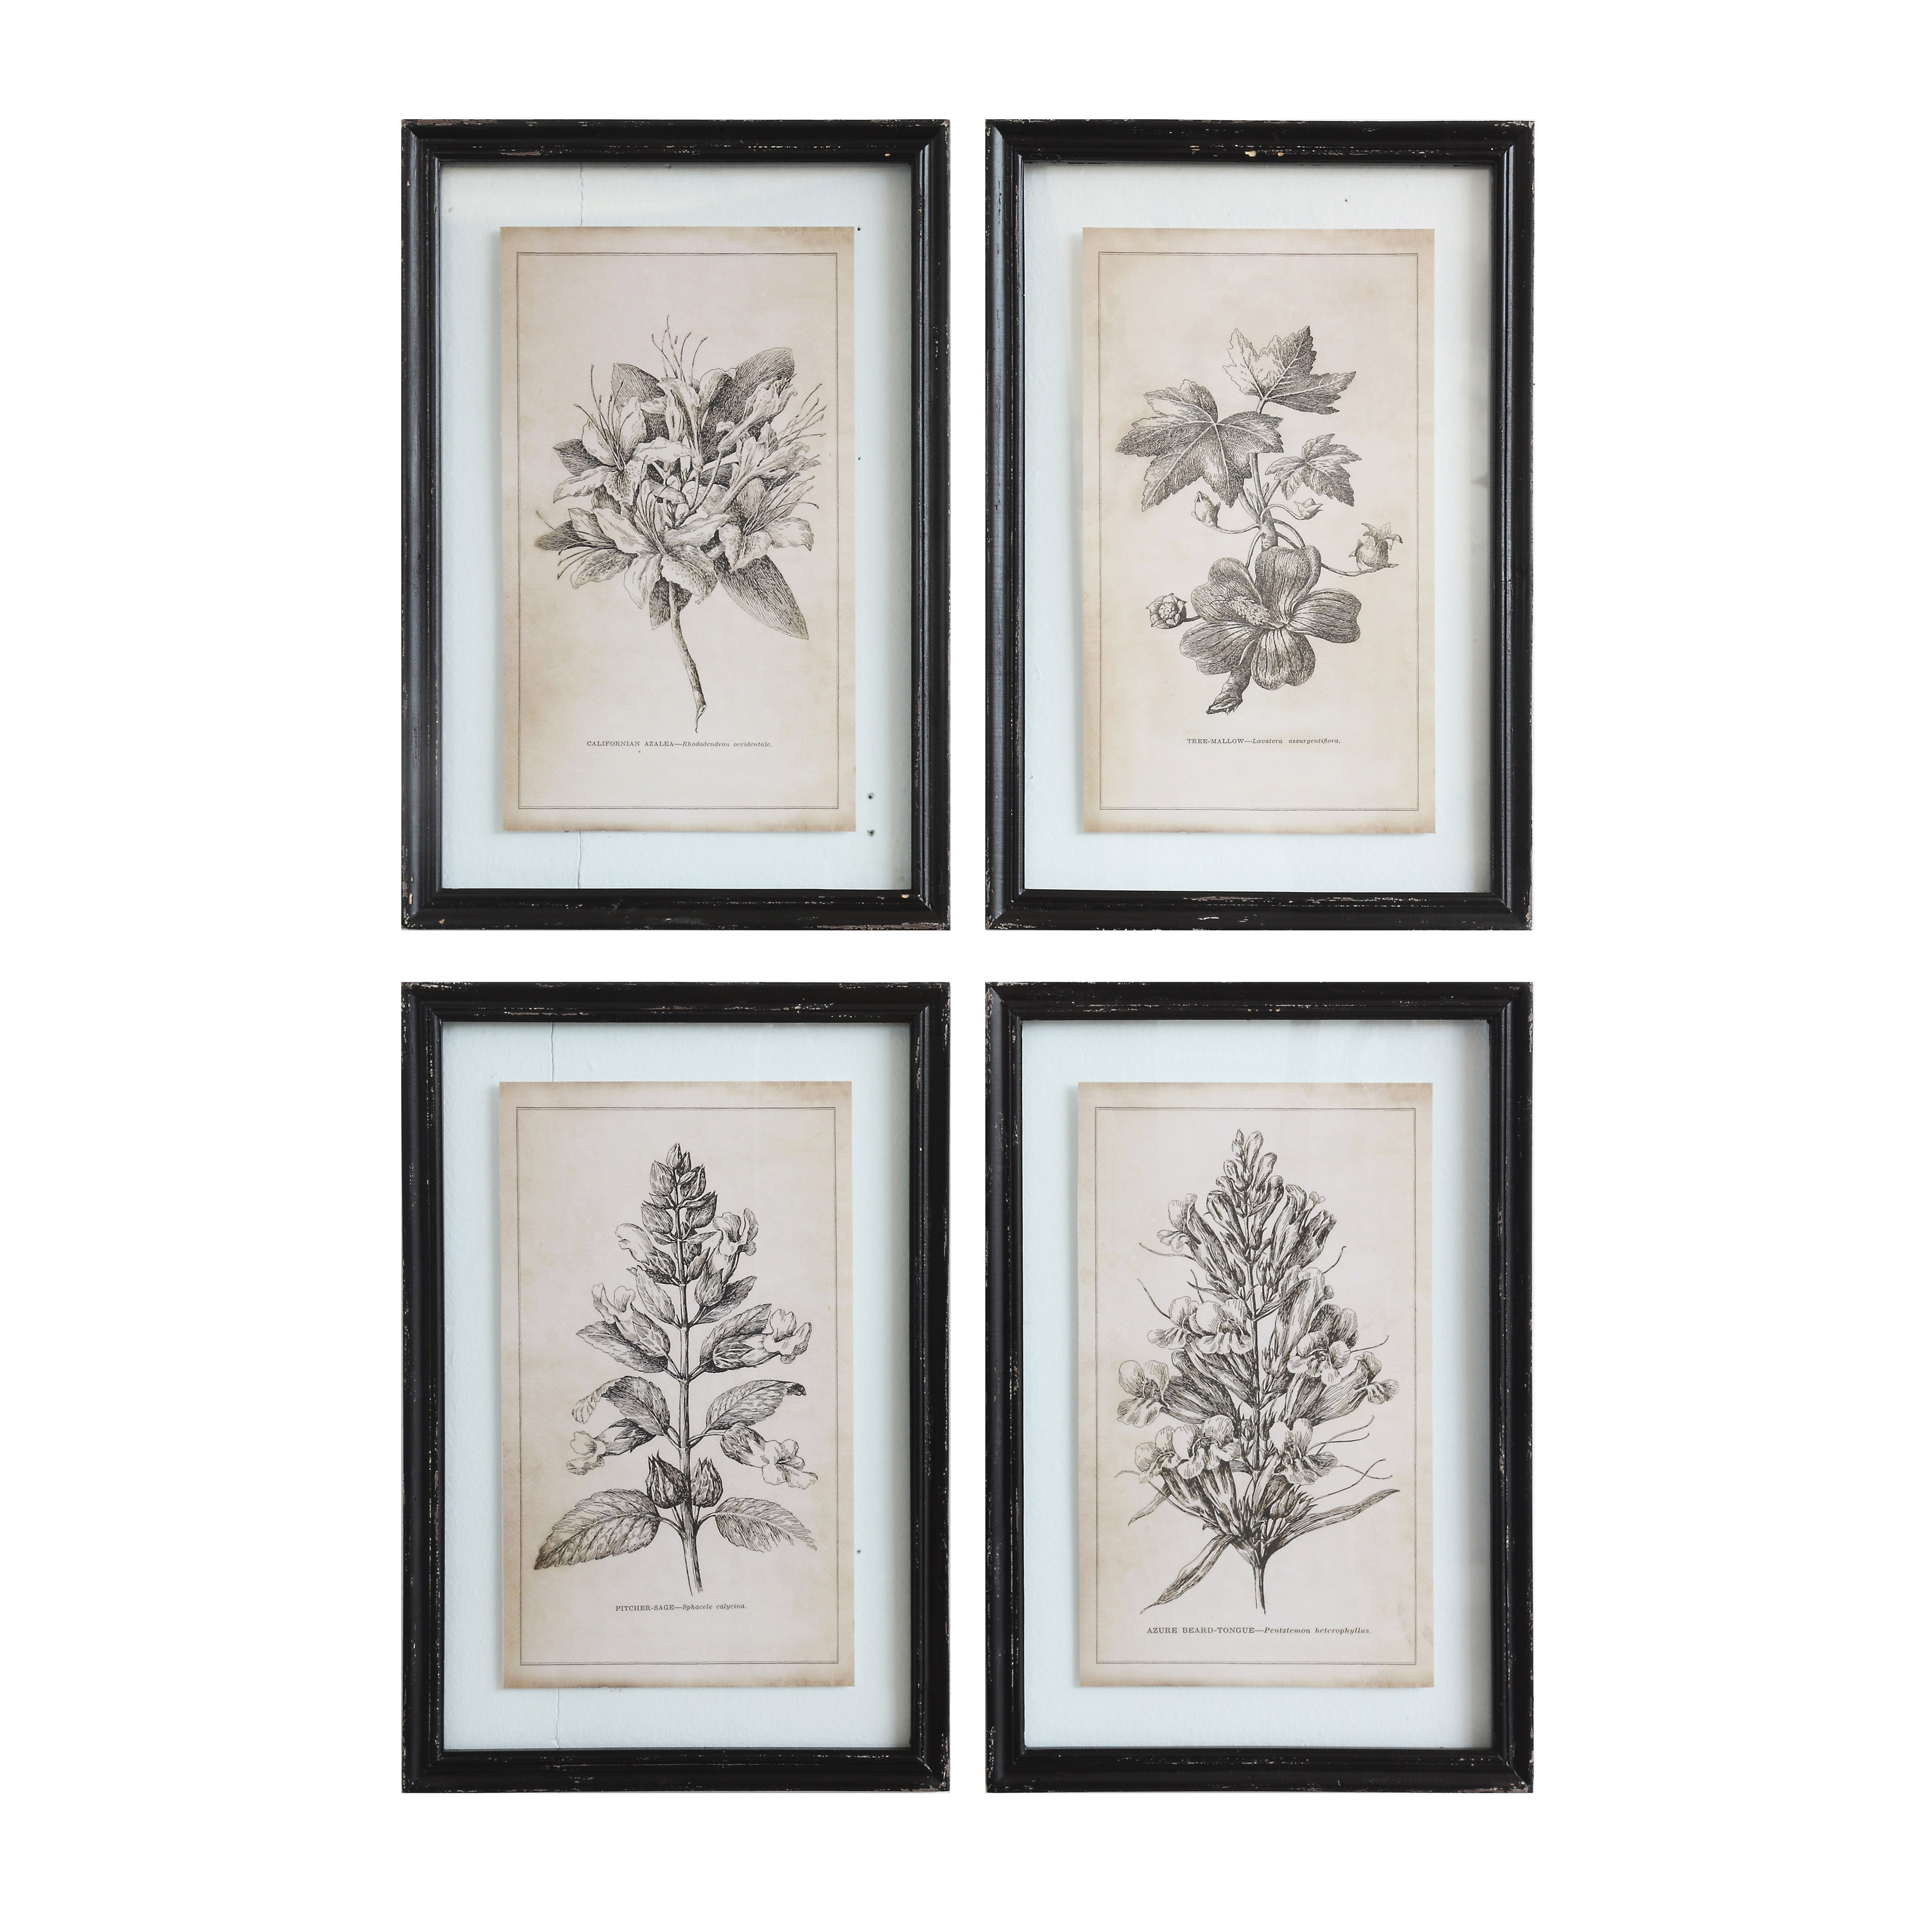 Wood Framed Wall Décor with Floral Images (Set of 4 Designs) - Nomad Home